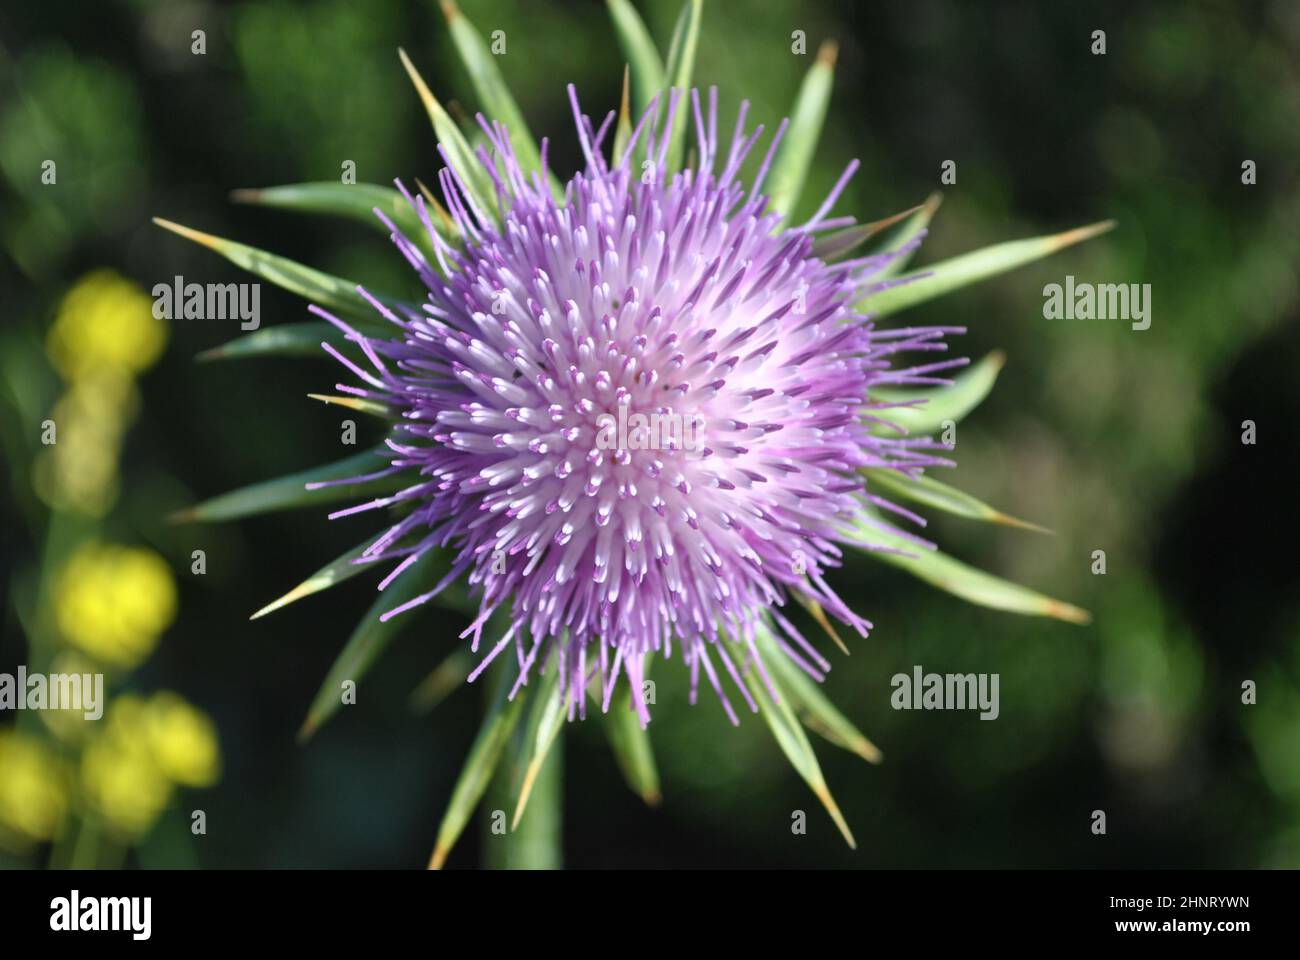 Milk Thistle flower (Silybum marianum or Carduus marianus) blooming in the field. Pruple milk thistle with green background at the botanical garden. Stock Photo